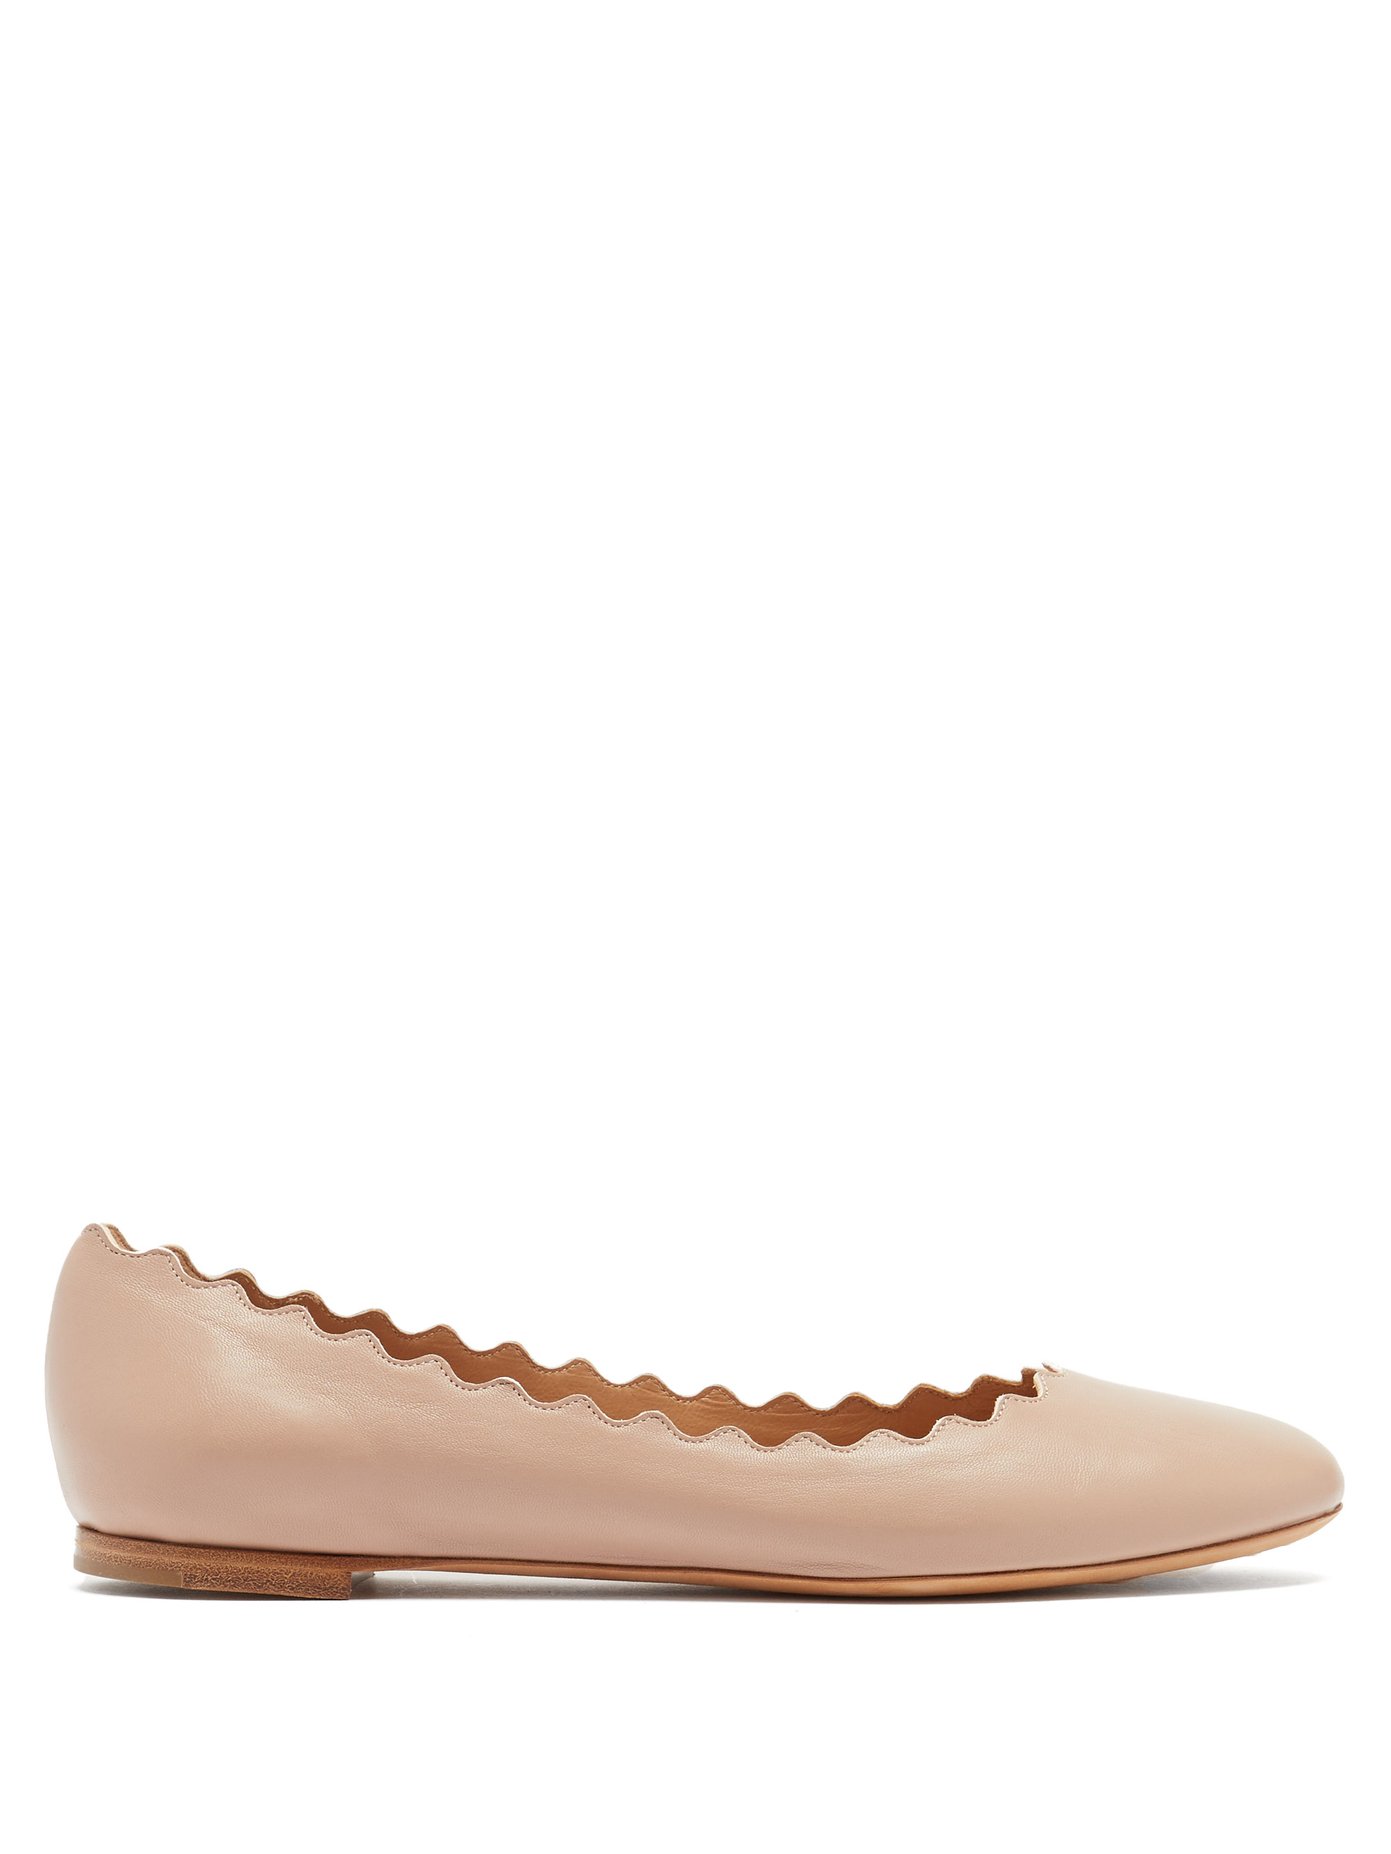 ballet flats leather